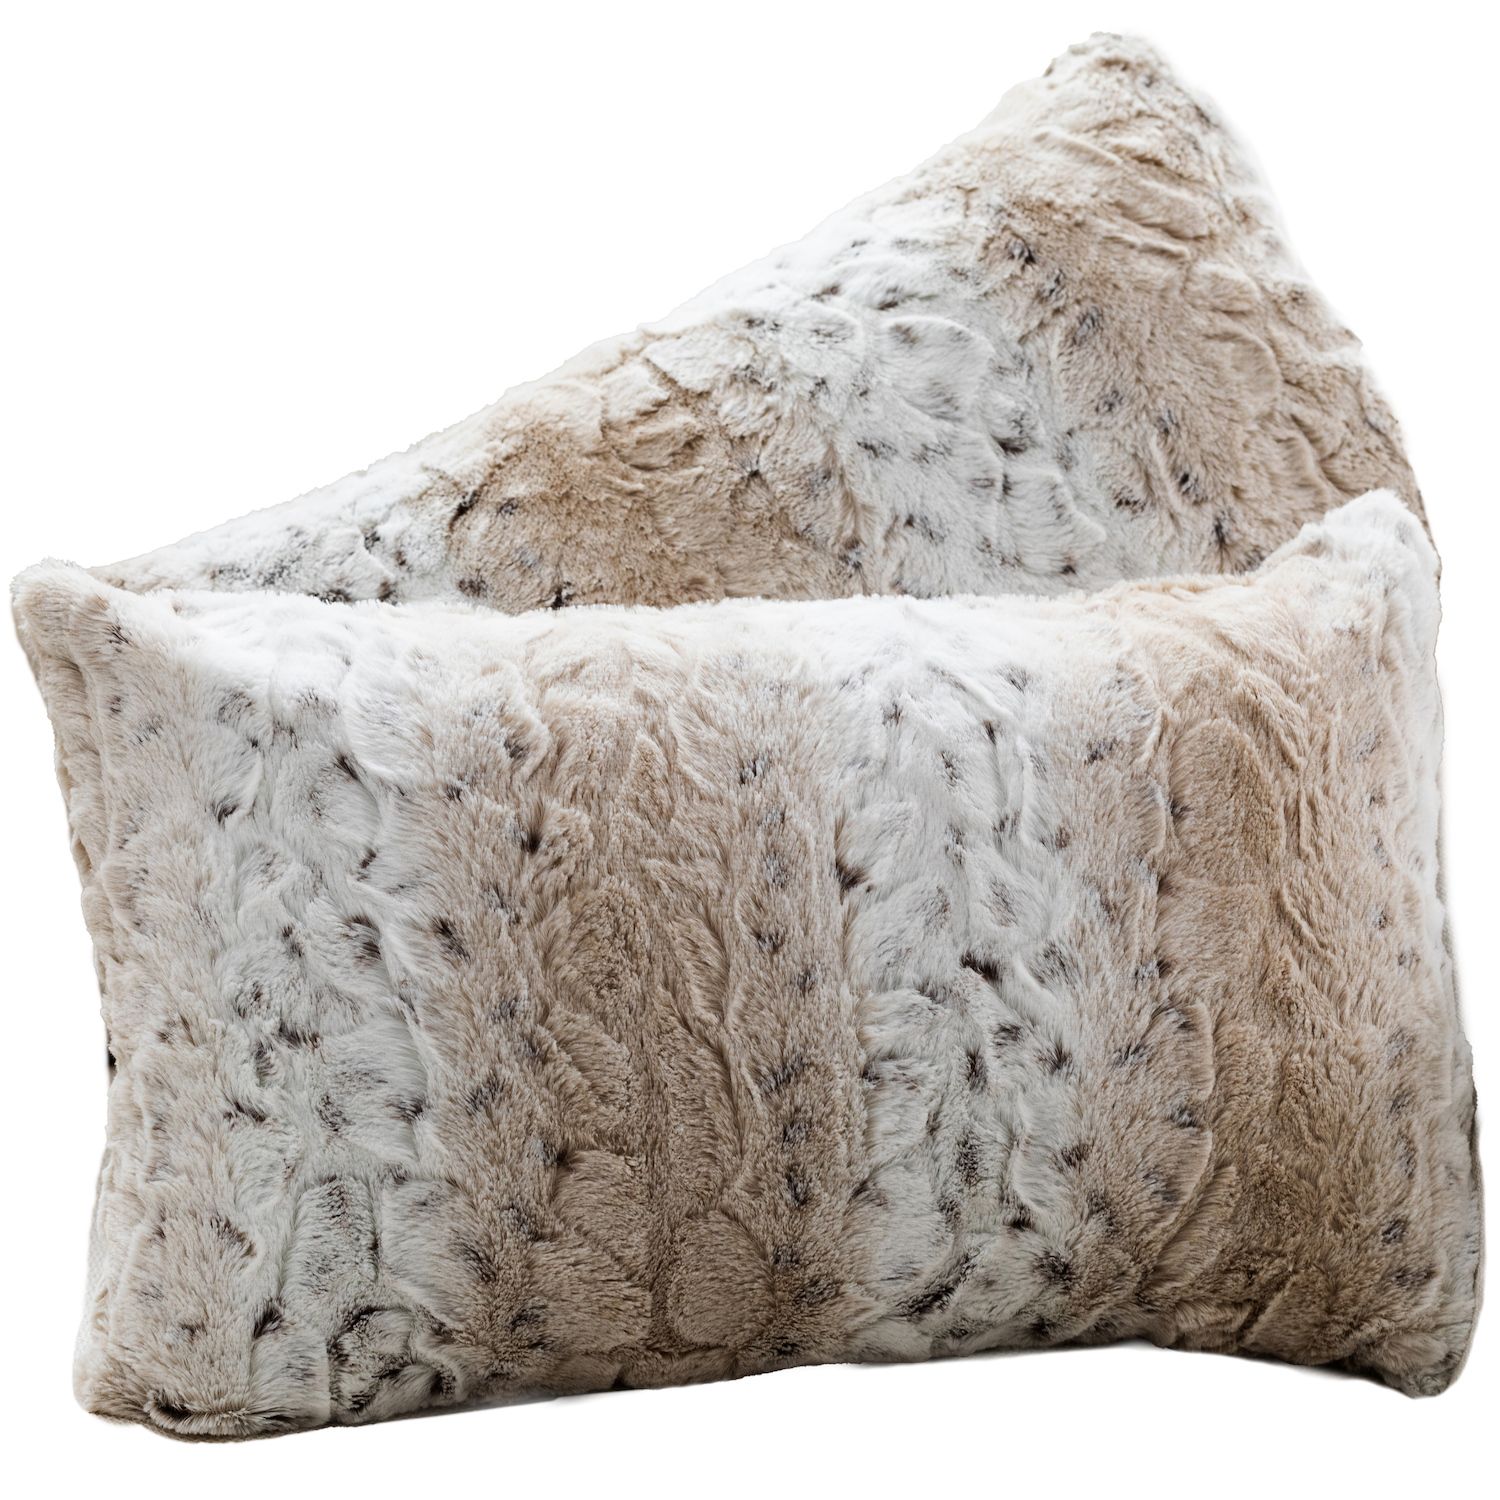 Cheer Collection Set of 2 Leopard Print Soft Velvety Faux Fur Decorative  Lumbar Couch Pillows, 1 - Kroger